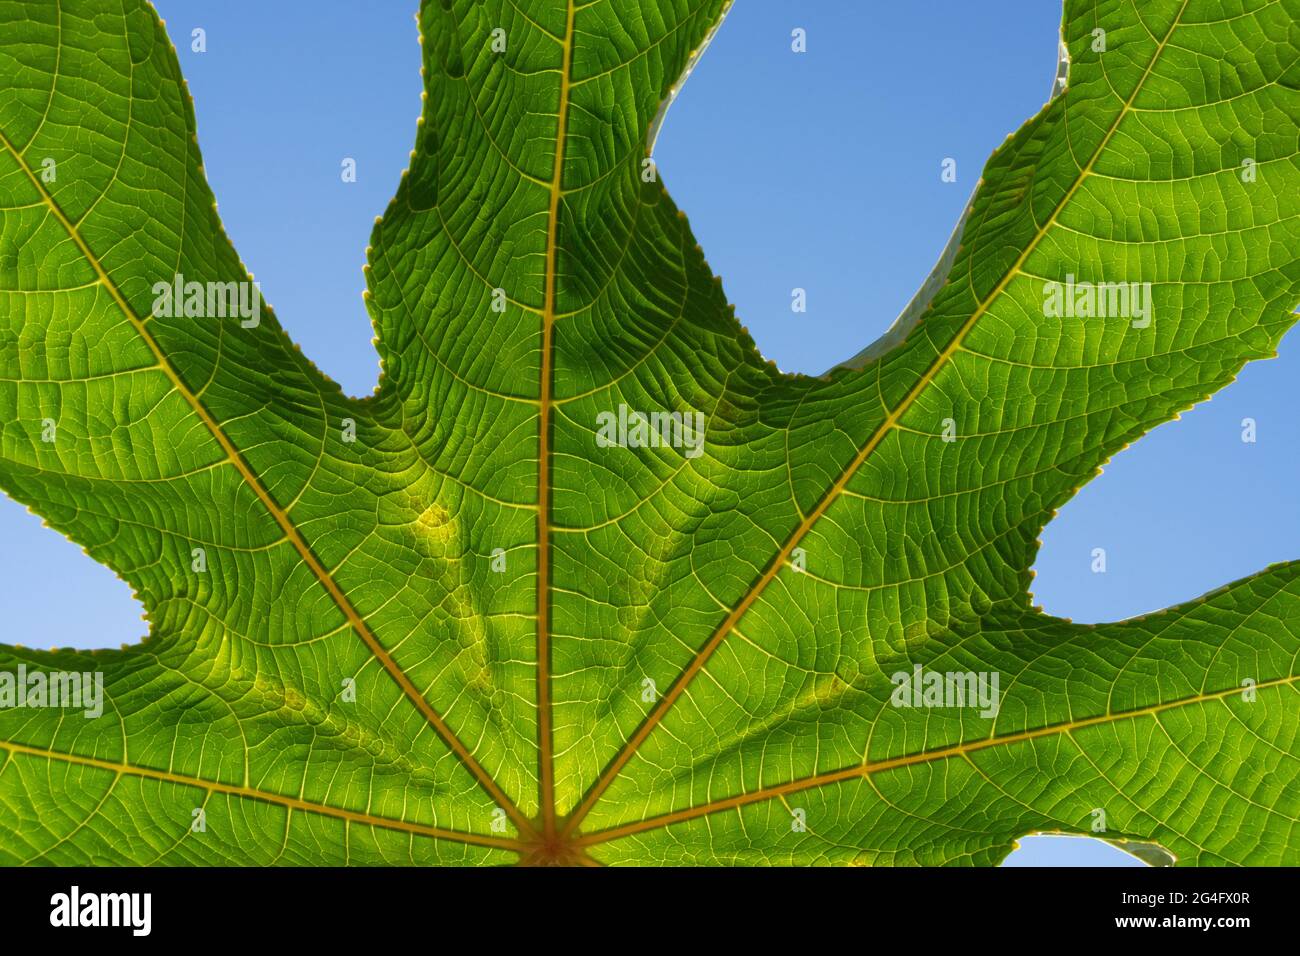 natural fresh green leaf structure and blue sky botany close-up Stock Photo